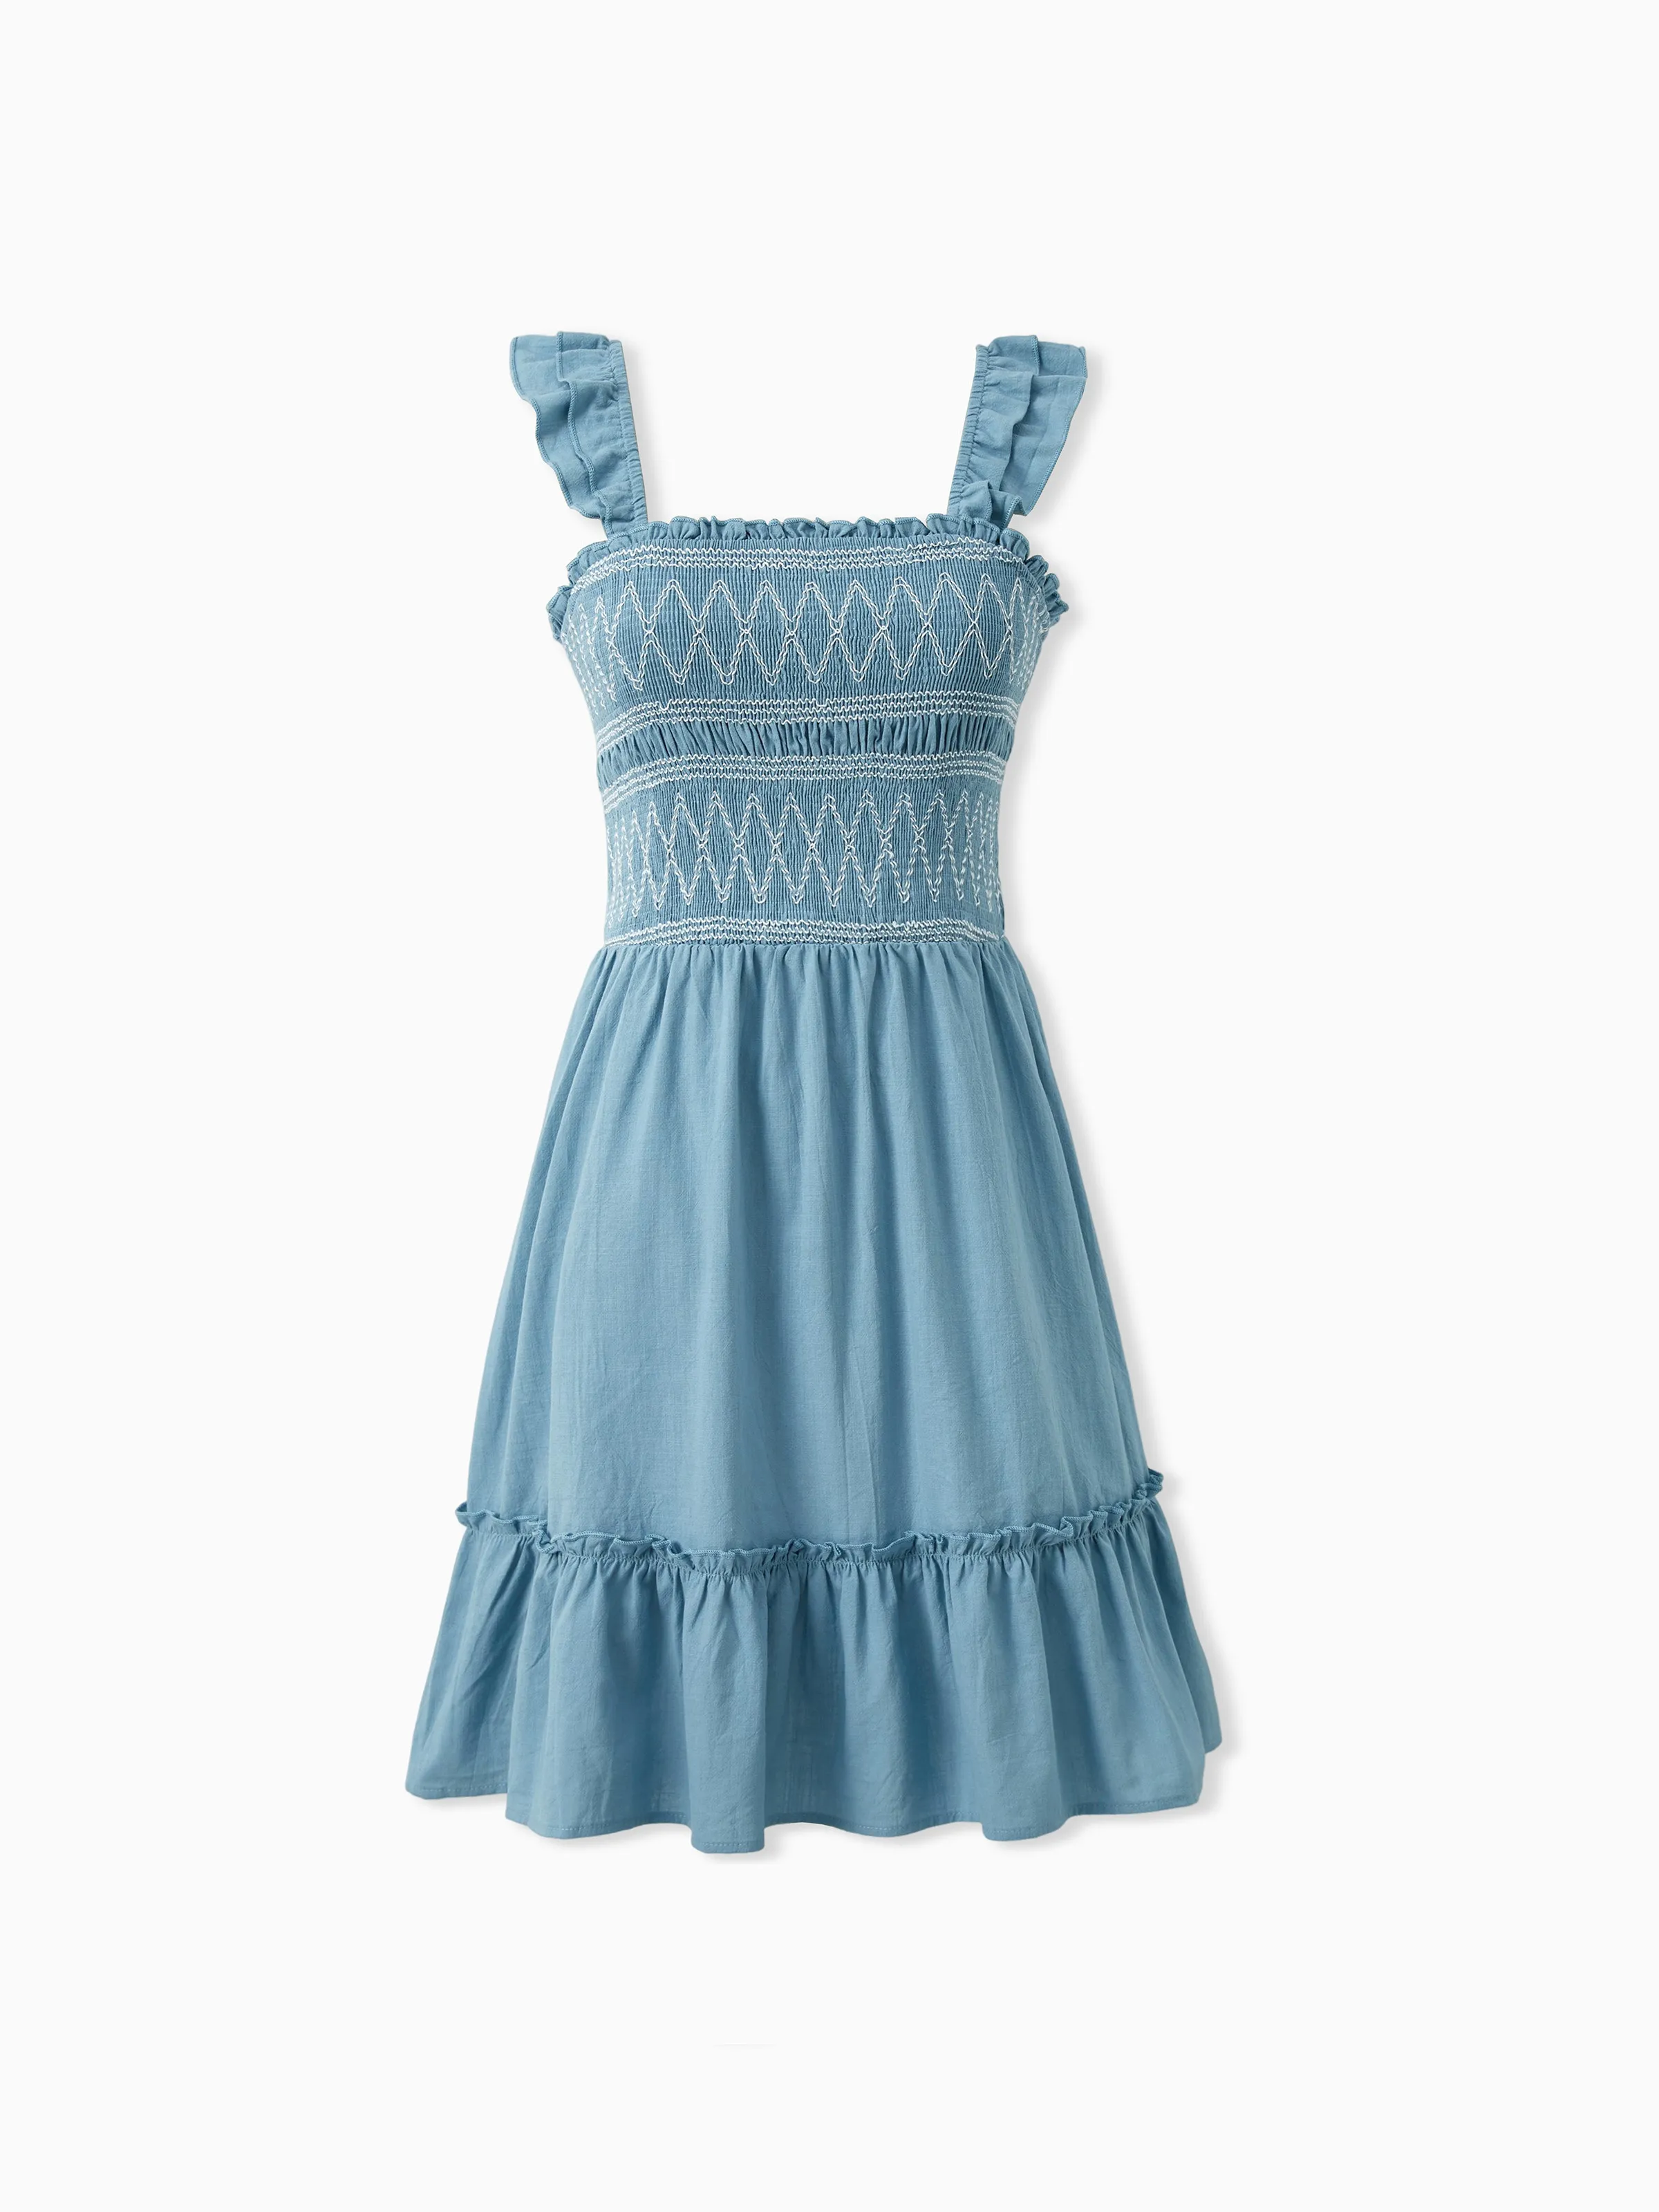 

Family Matching Sets Solid Color Shirt or Shirred Top Geometric Design Ruffle Hem Strap Dress